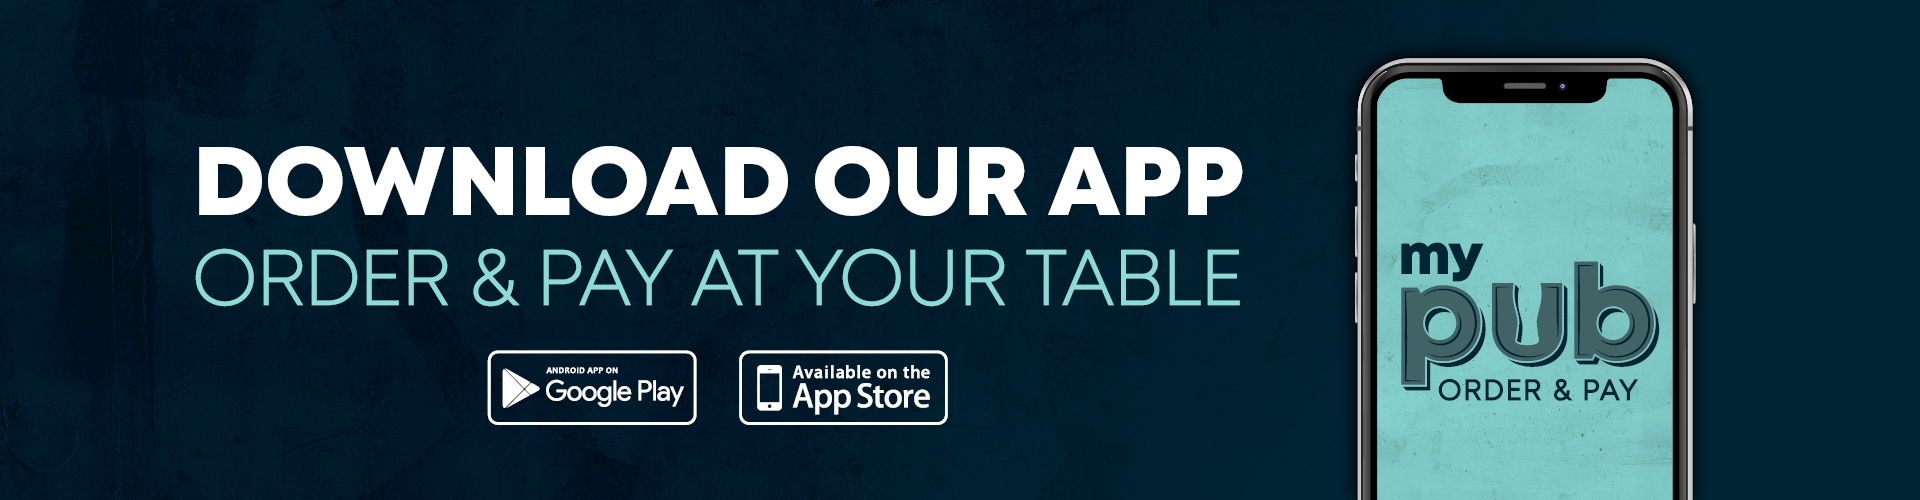 Download Our App - Order & Pay At Your Table